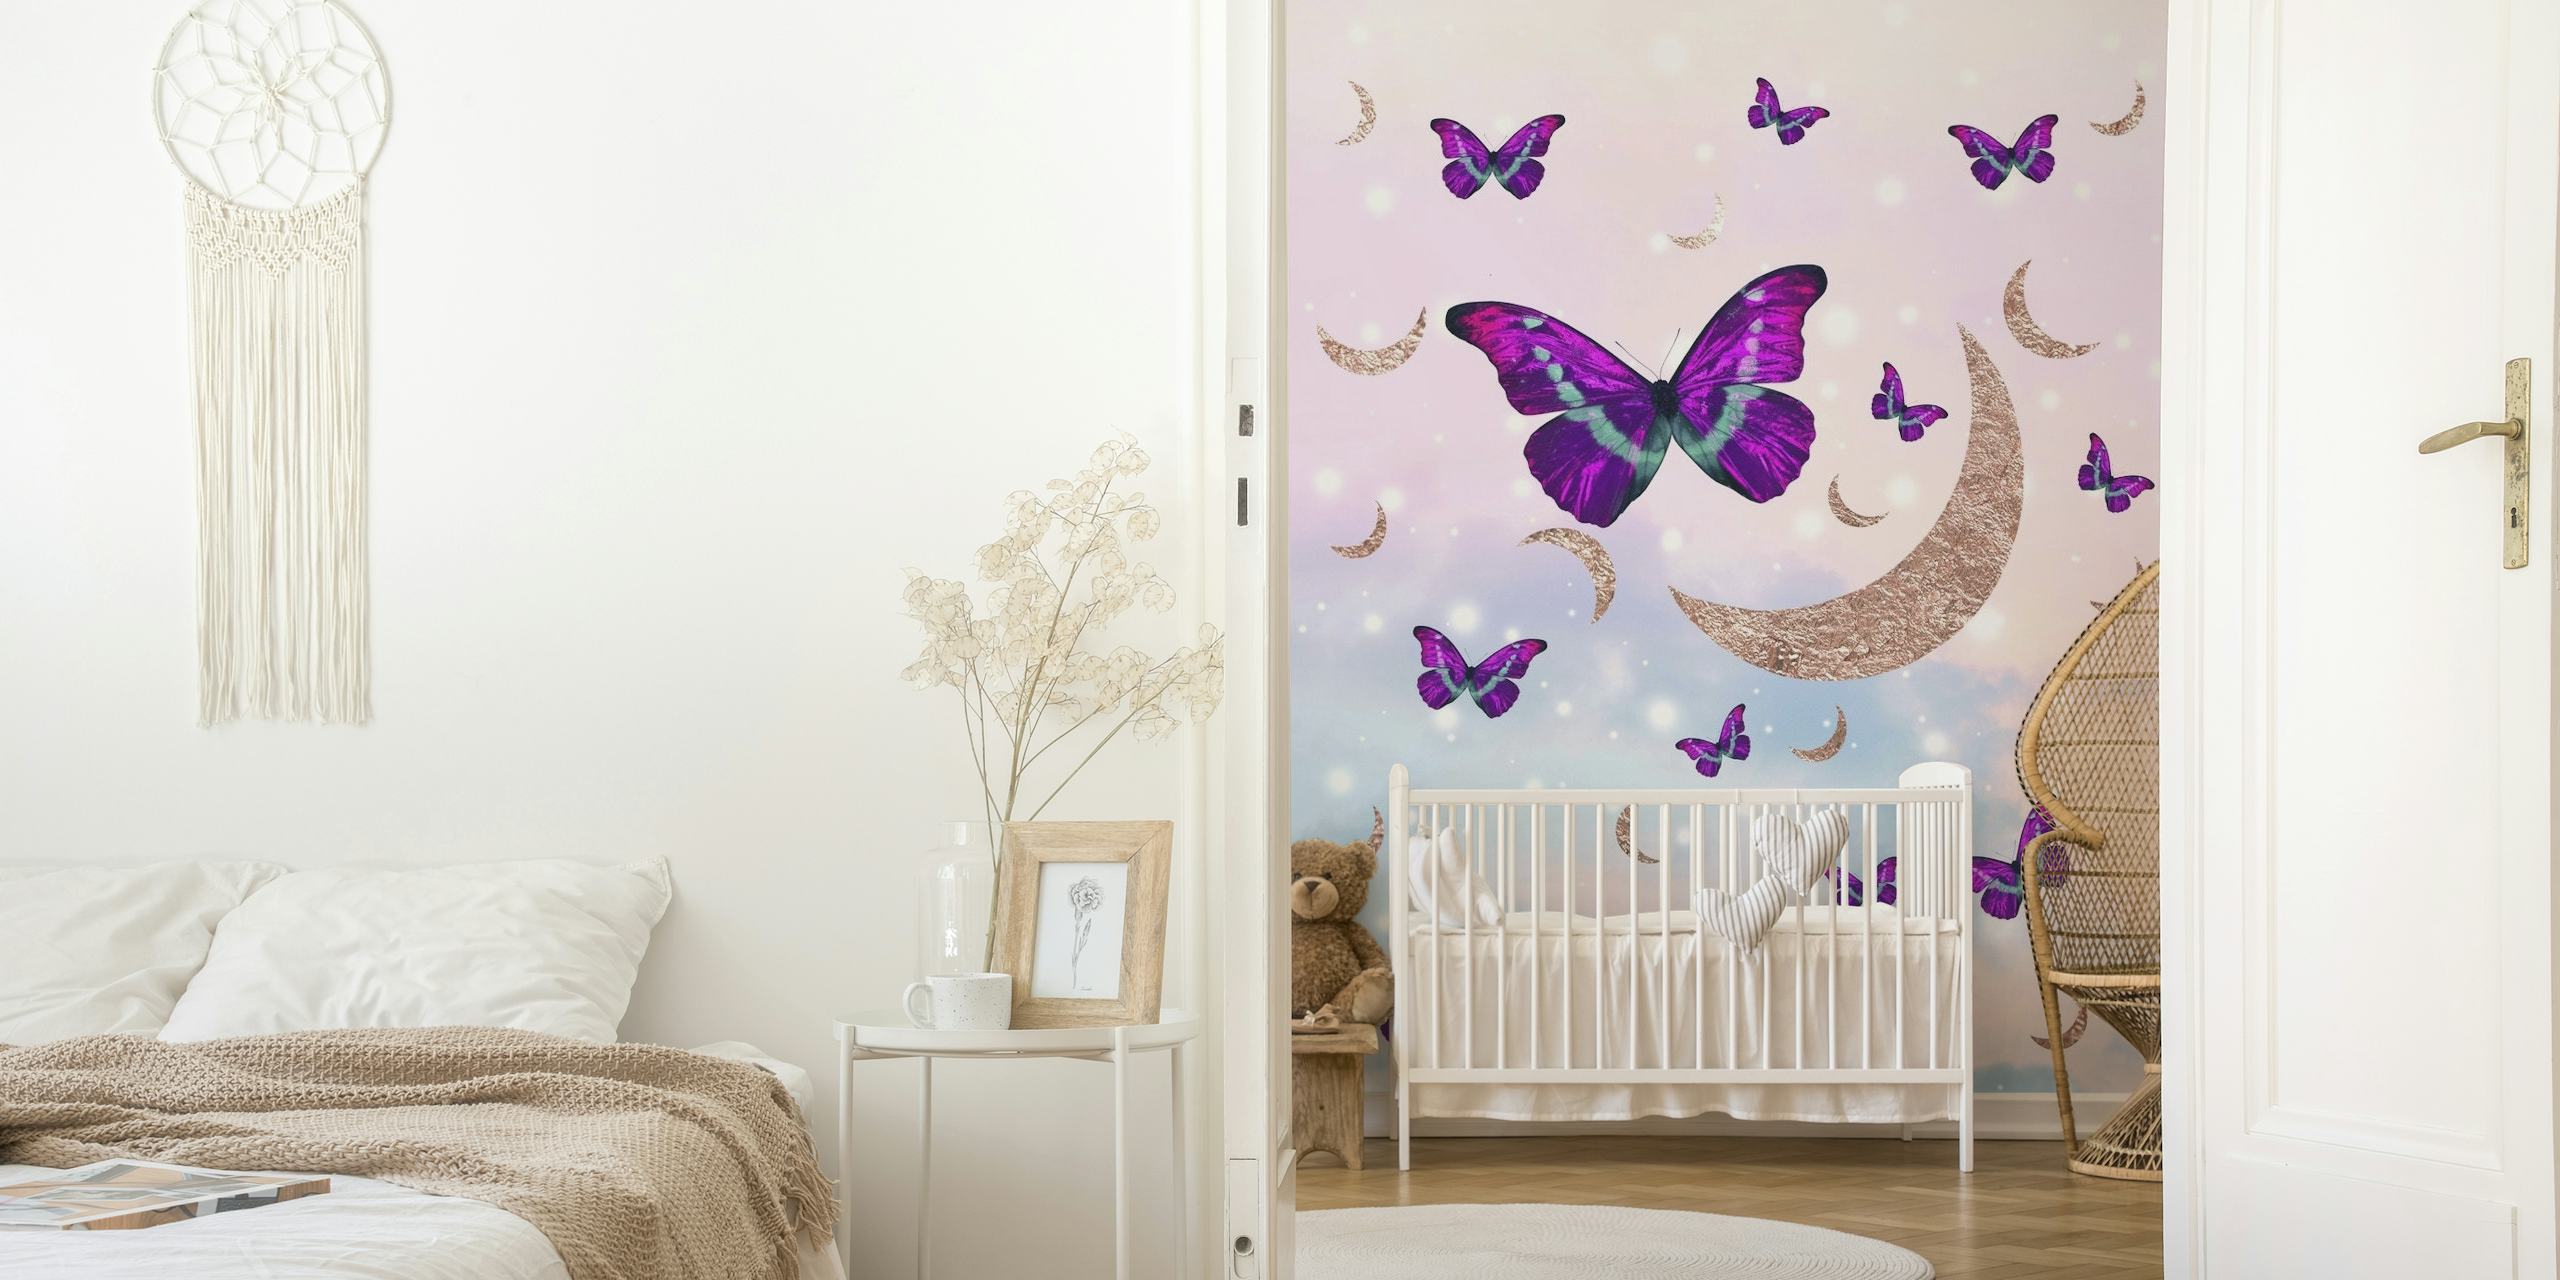 Pastel Cosmos Butterfly Moon 1 behang